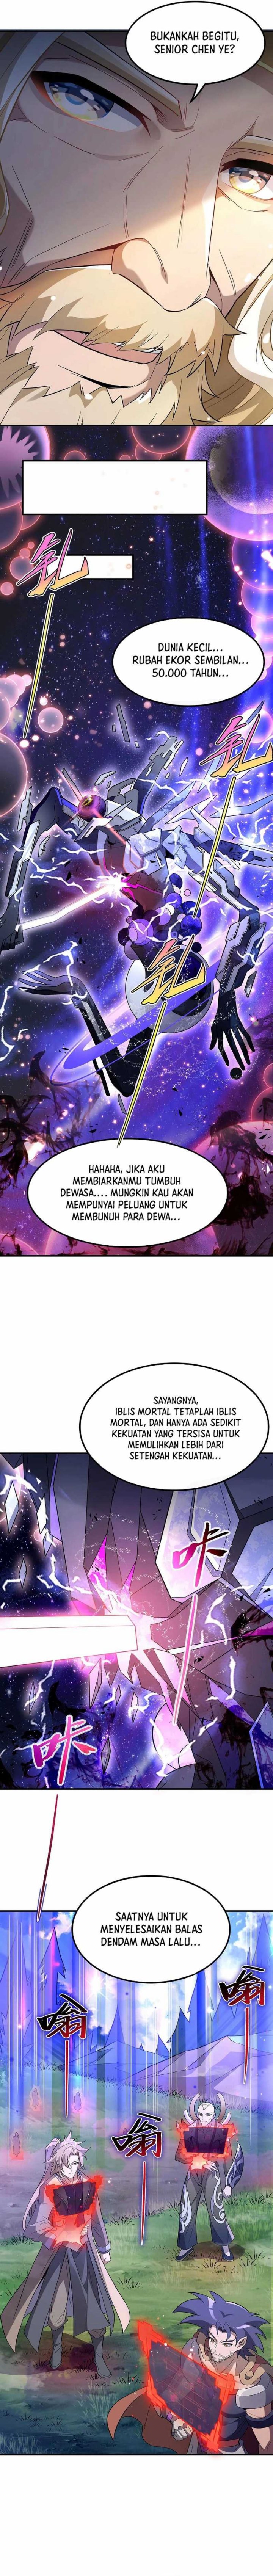 Dilarang COPAS - situs resmi www.mangacanblog.com - Komik my female apprentices are all big shots from the future 237 - chapter 237 238 Indonesia my female apprentices are all big shots from the future 237 - chapter 237 Terbaru 7|Baca Manga Komik Indonesia|Mangacan